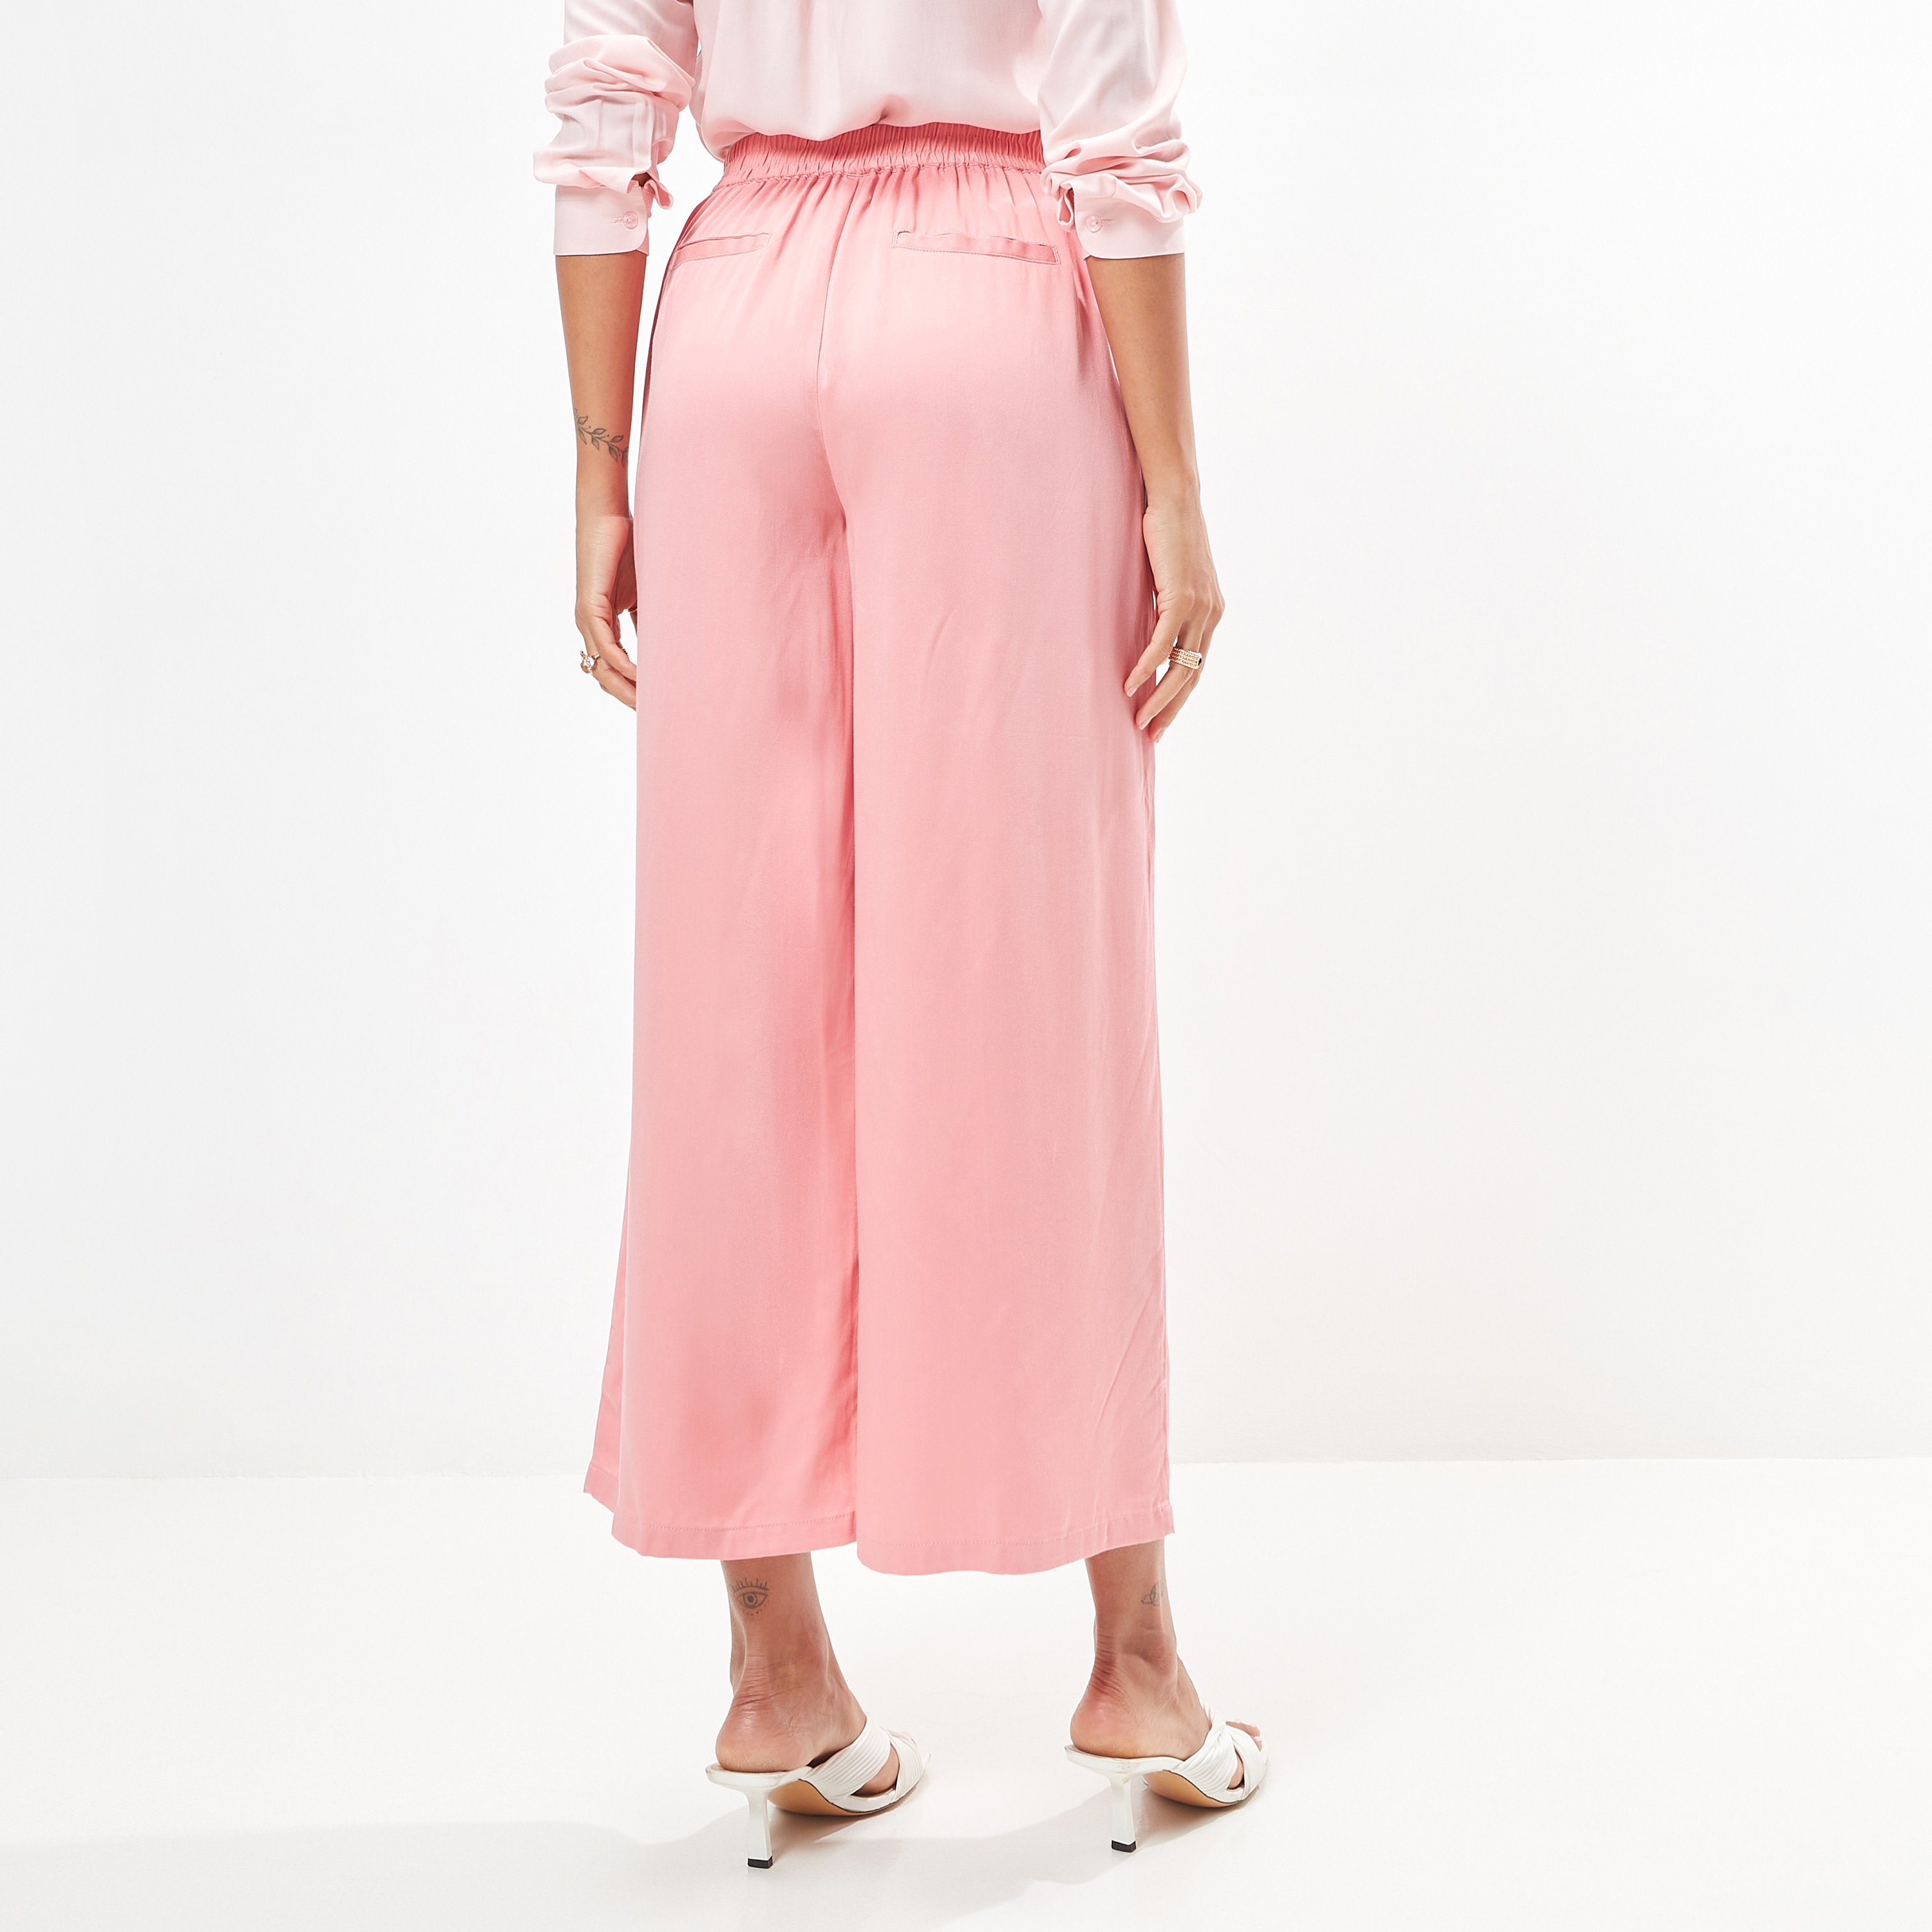 Buy Solid Mid-Rise Palazzo Pants with Tie-Up Detail and Pockets | Splash UAE